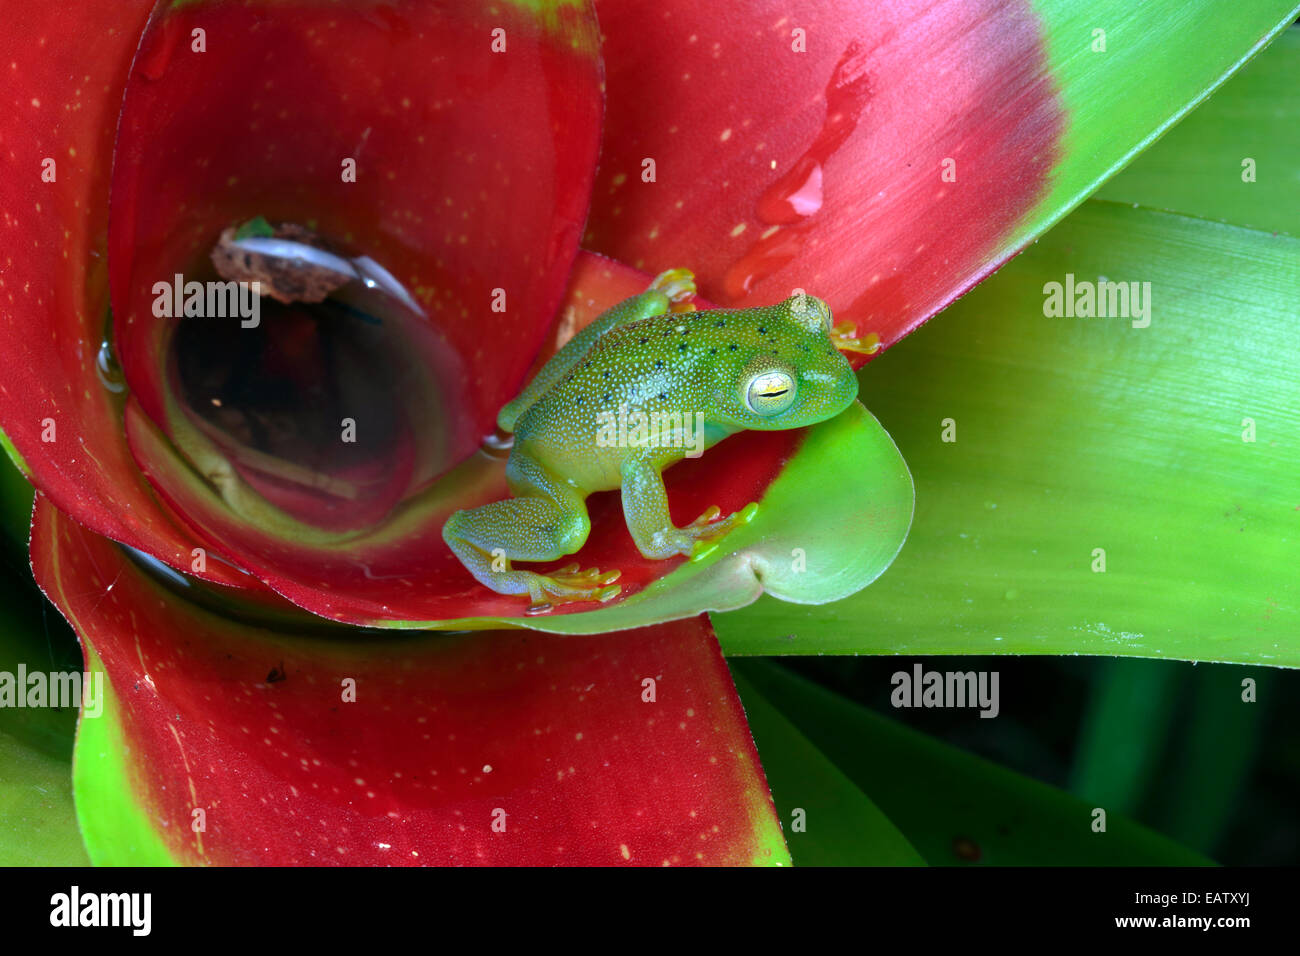 An emerald glass frog, Centrolene prosoblepon, peers from a bromeliad. Stock Photo